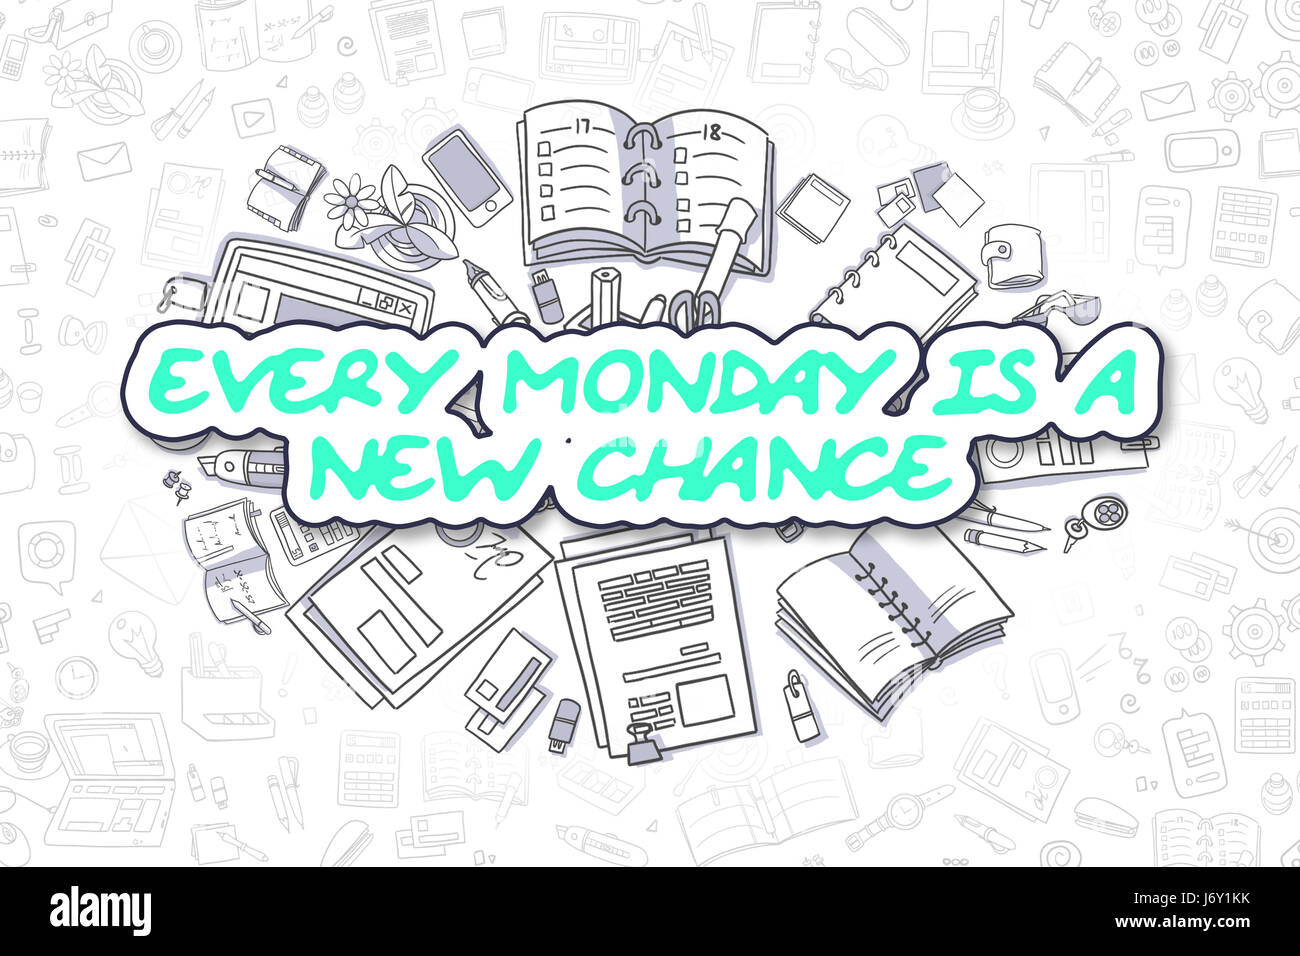 Every Monday Is A New Chance - Business Concept. Stock Photo